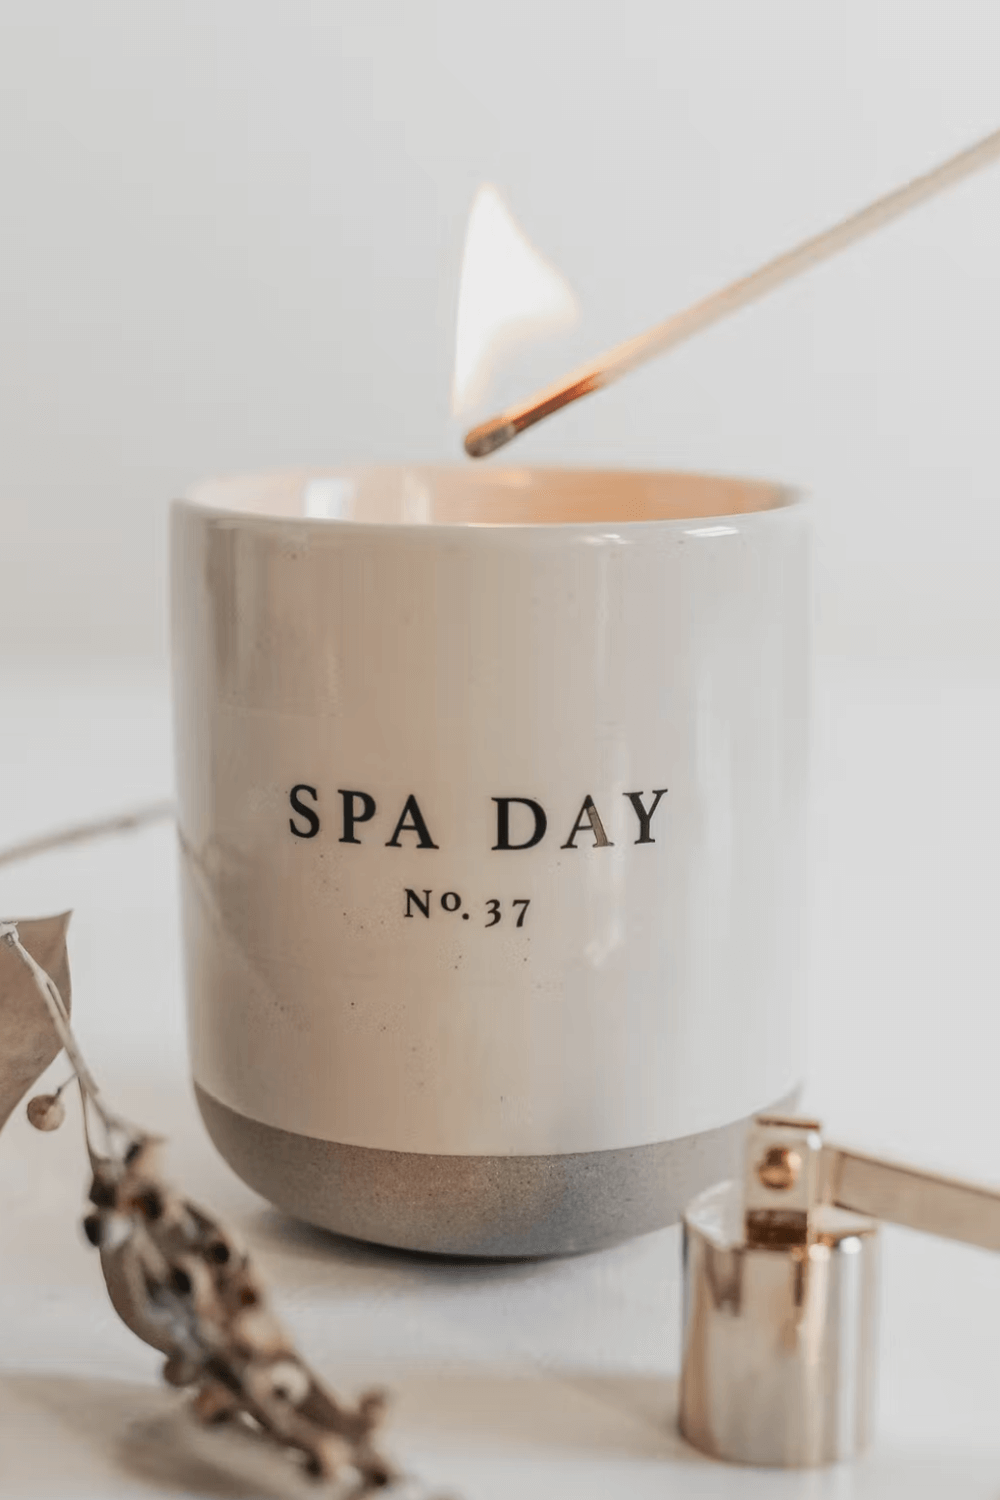 Vegan Valentines Day Gifts Spa Day Soy Vegan Candle